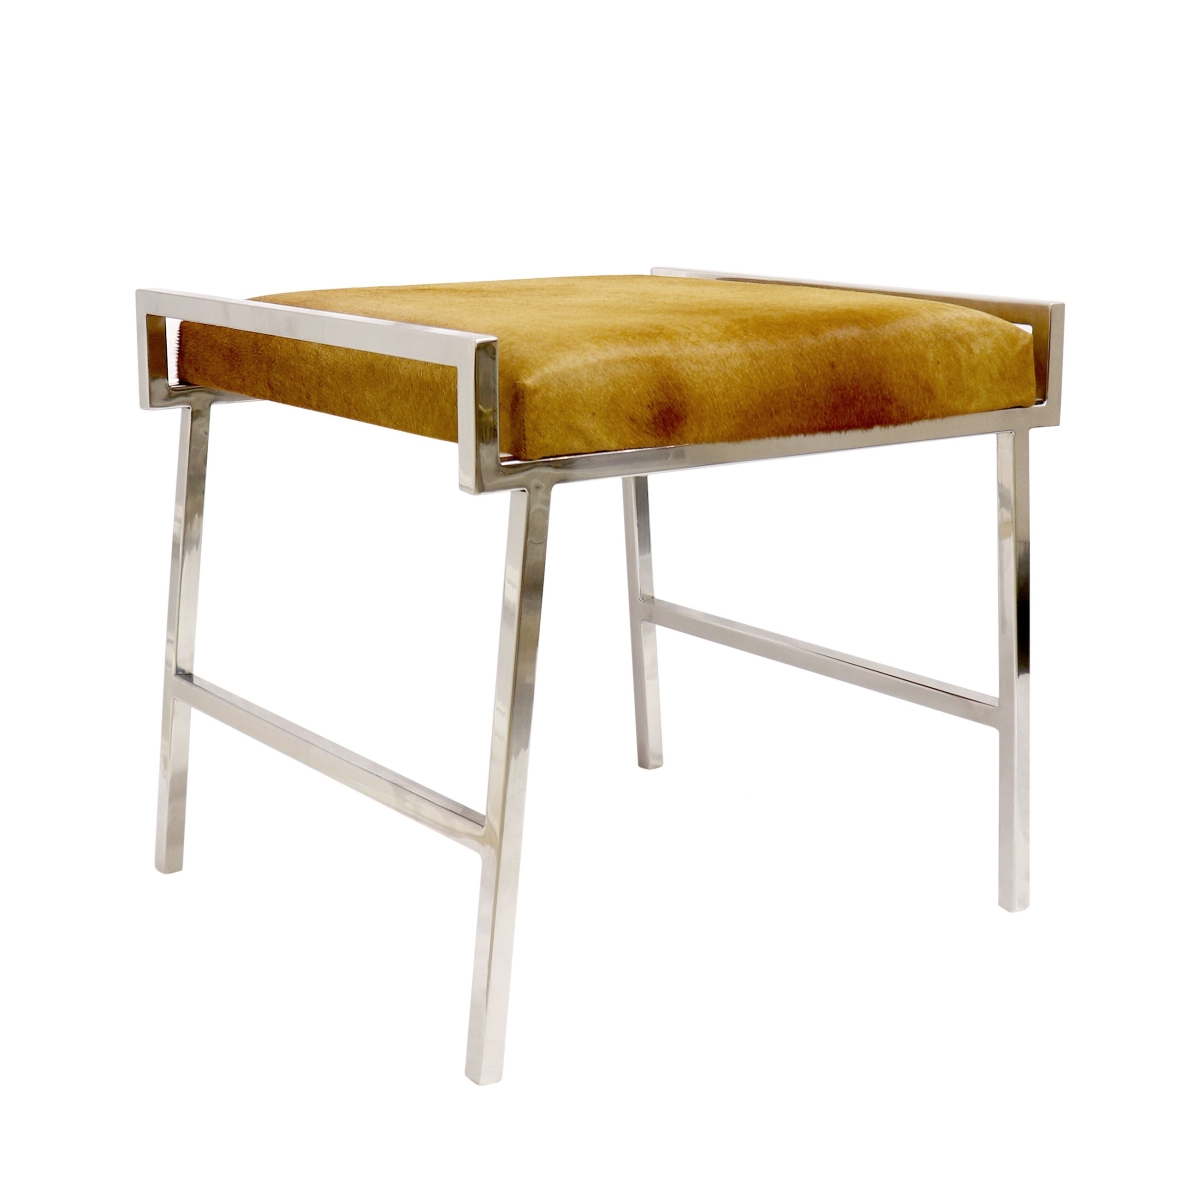 Psae-002 Eira Stool, Stainless Steel Frame With Cowhide Seat